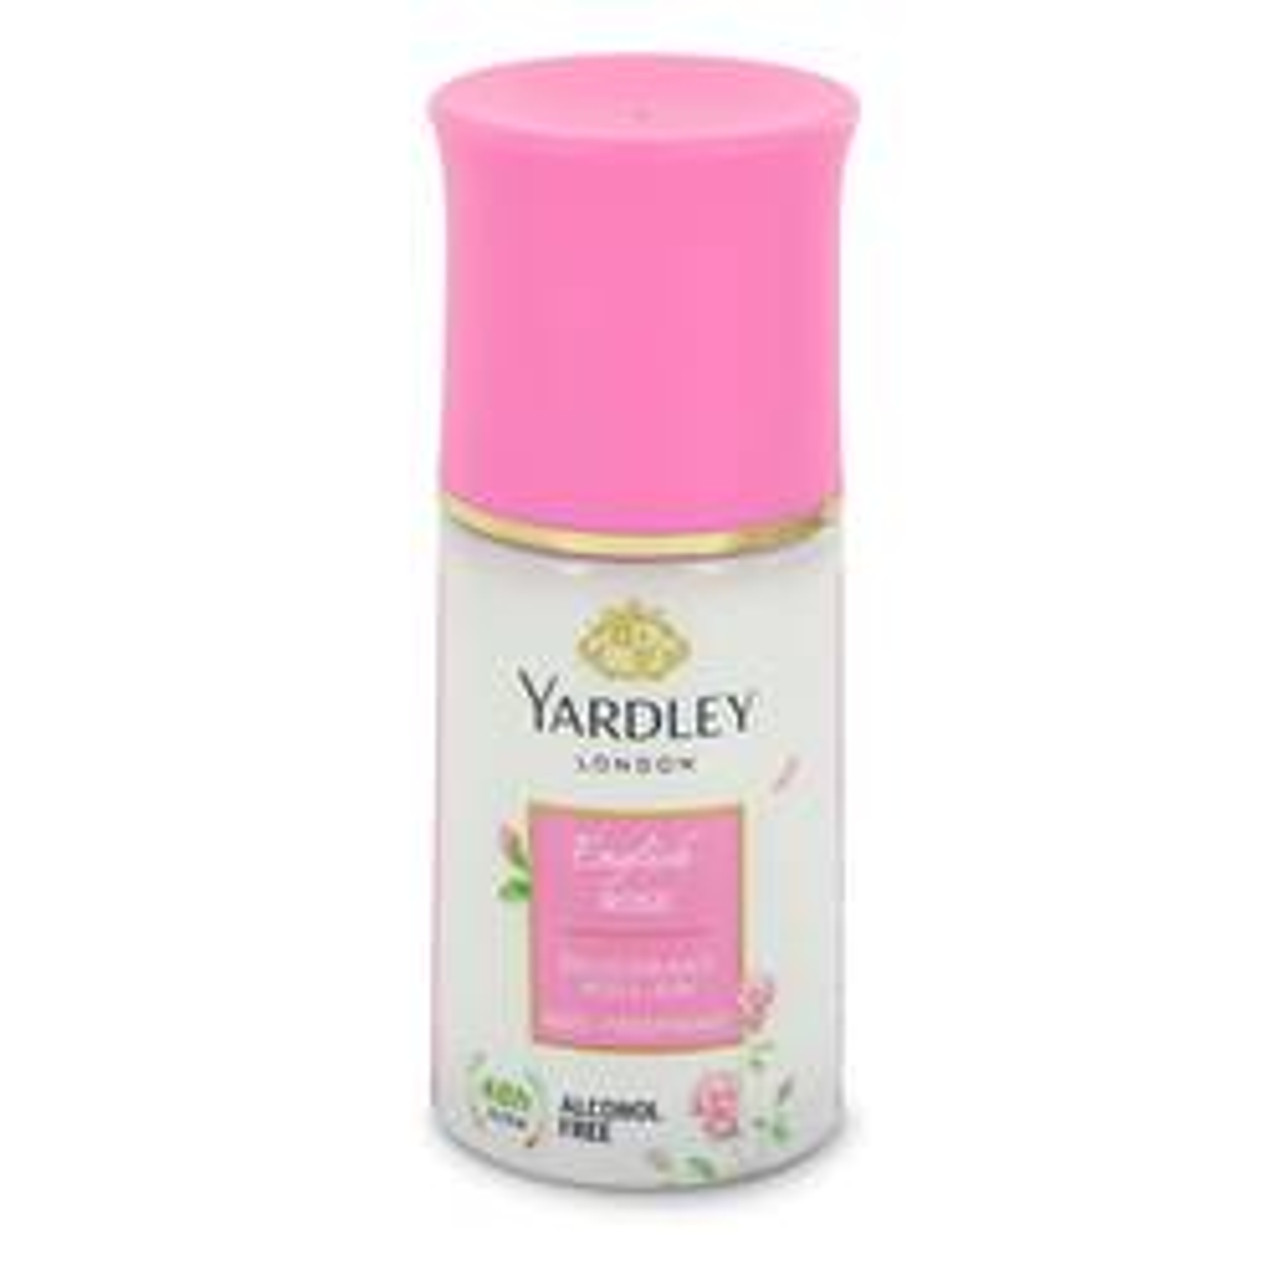 English Rose Yardley Perfume By Yardley London Deodorant Roll-On Alcohol Free 1.7 oz for Women - [From 19.00 - Choose pk Qty ] - *Ships from Miami